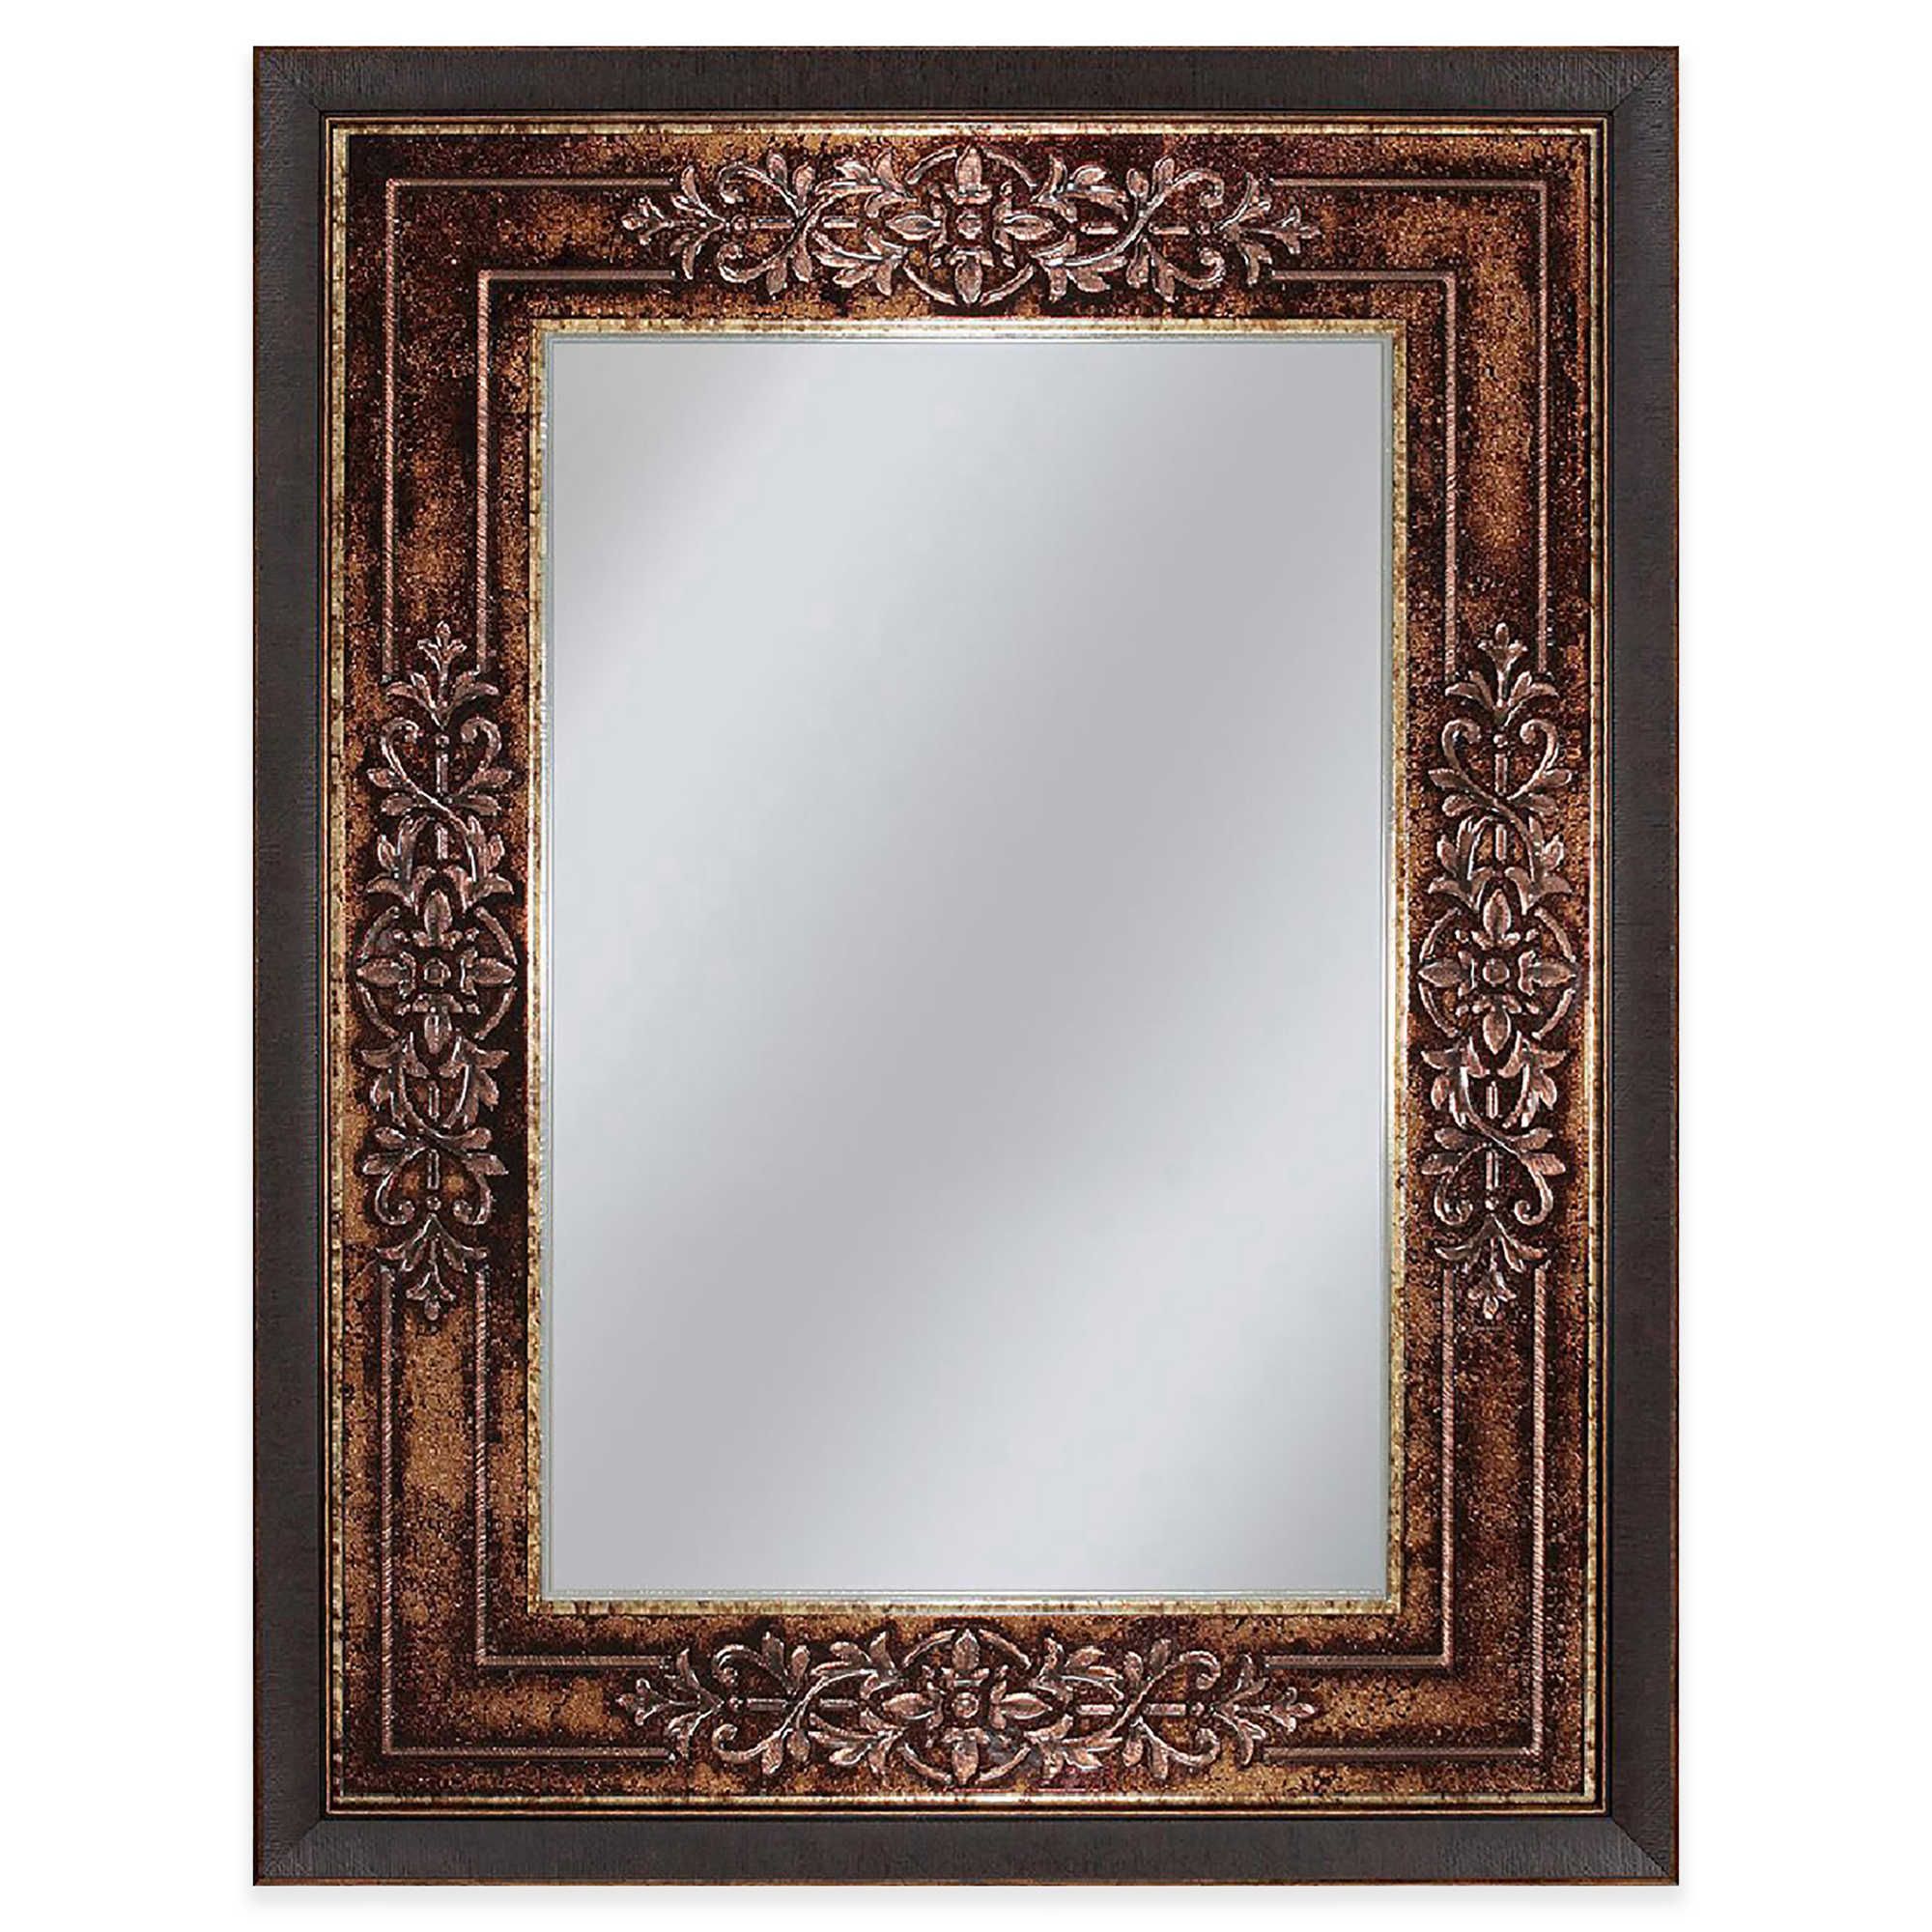 Genoa 27 Inch X 33 Inch Mirror In Bronze | Mirror Wall, Framed Mirror Inside Silver And Bronze Wall Mirrors (View 1 of 15)